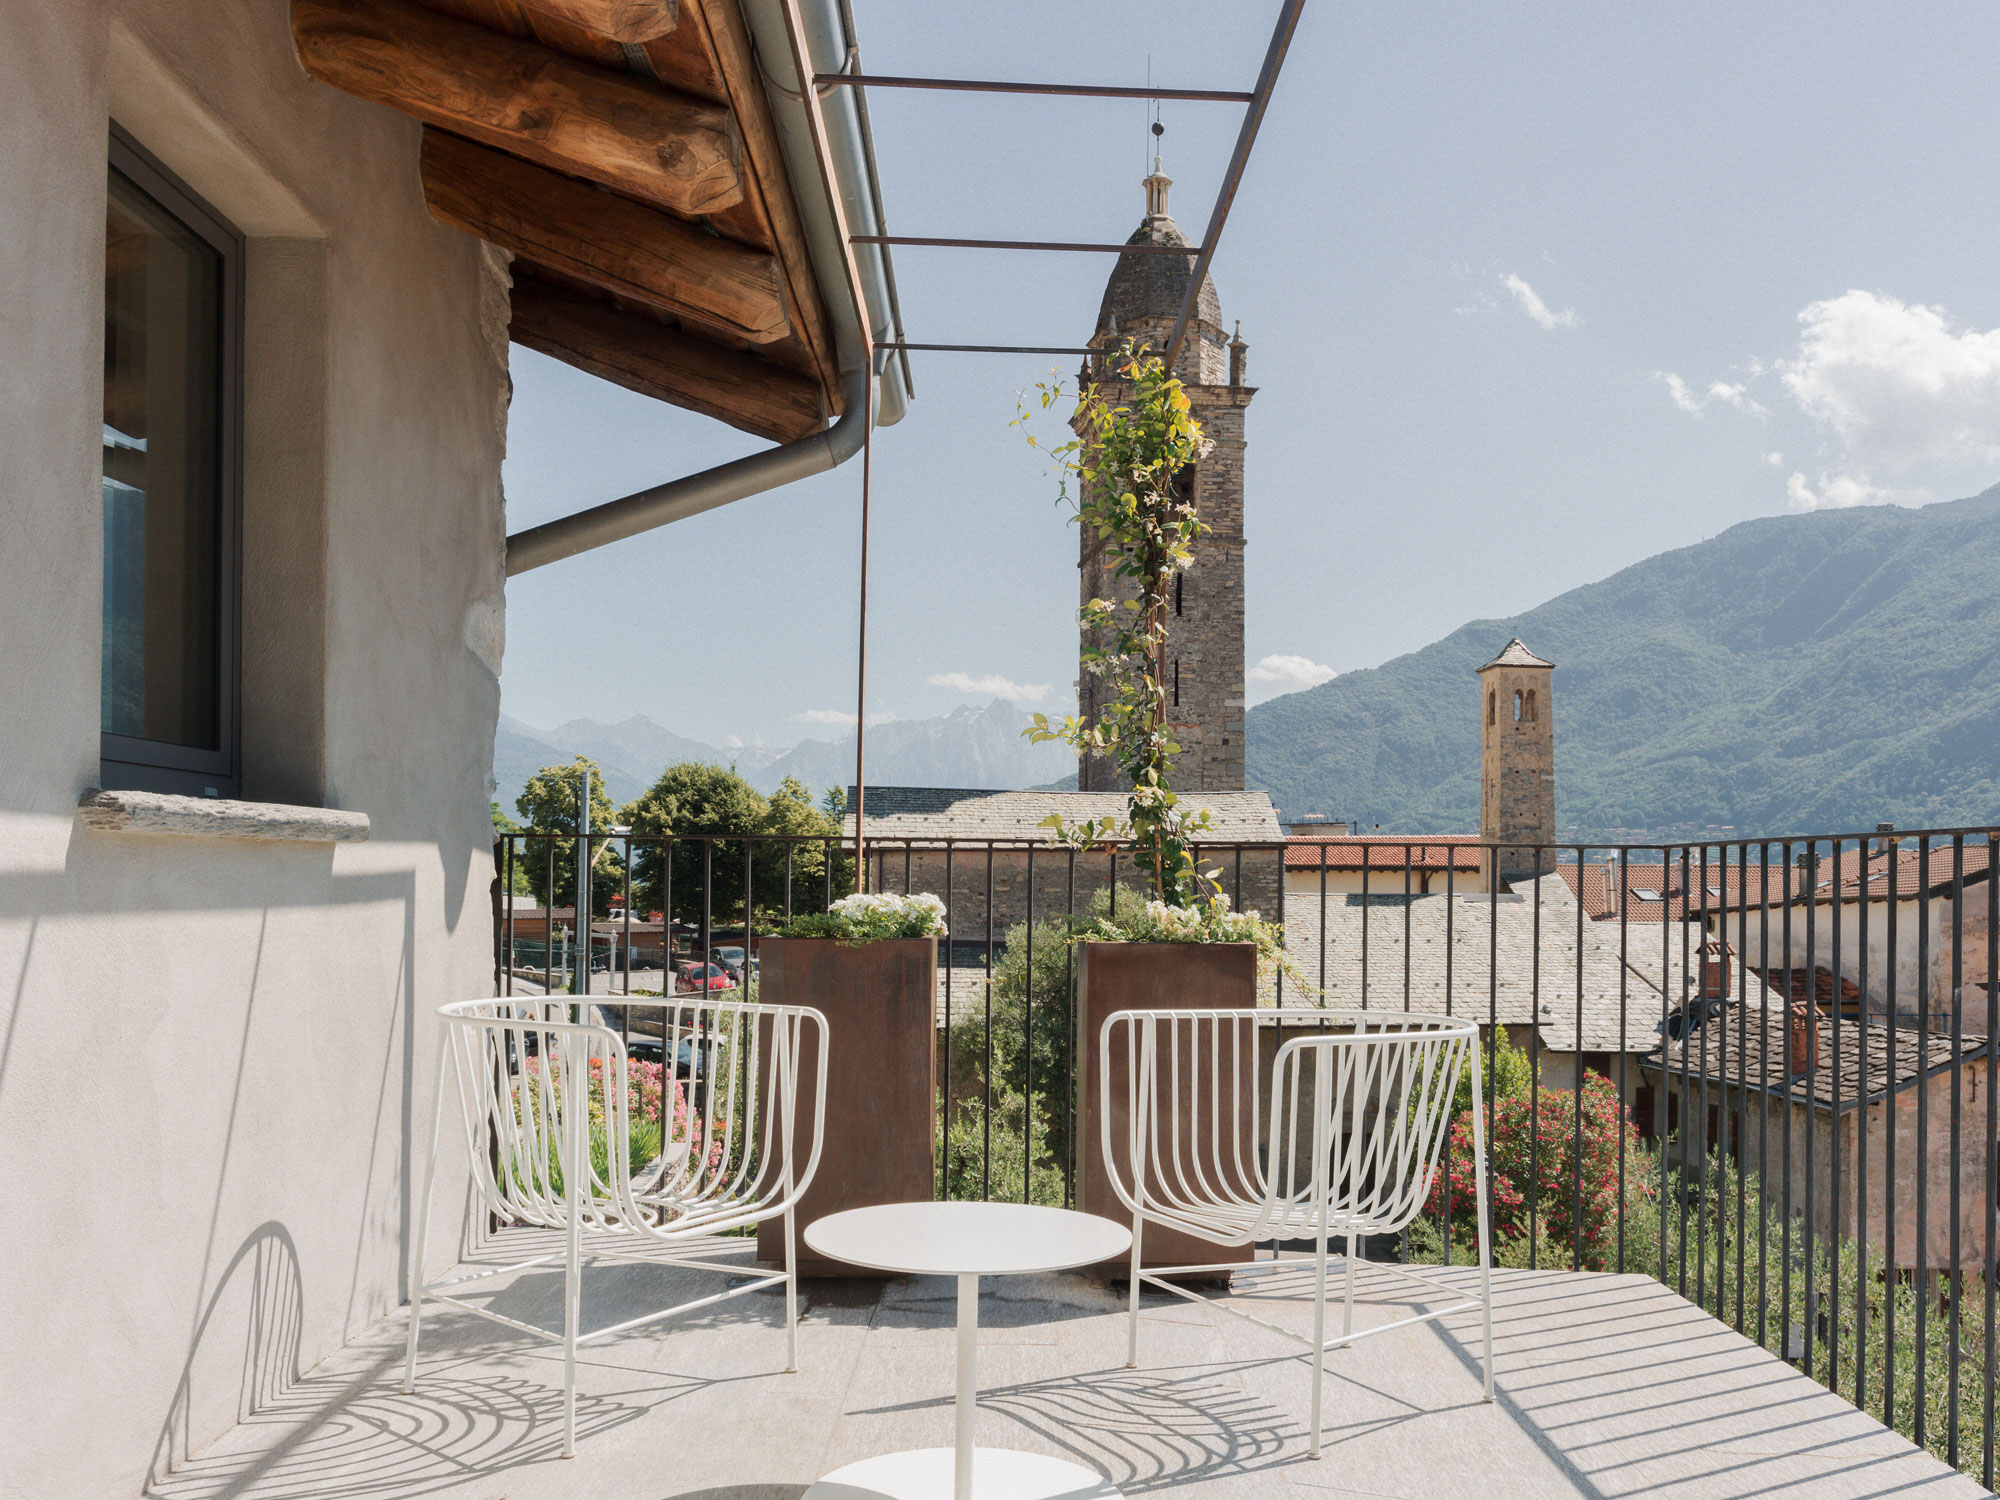 Casa Olea Hotel is a renovated old vicarage located in Cremia, Lake Como - Italy. Each Deluxe room has breath taking views over the lake and the mountains from private terrace.